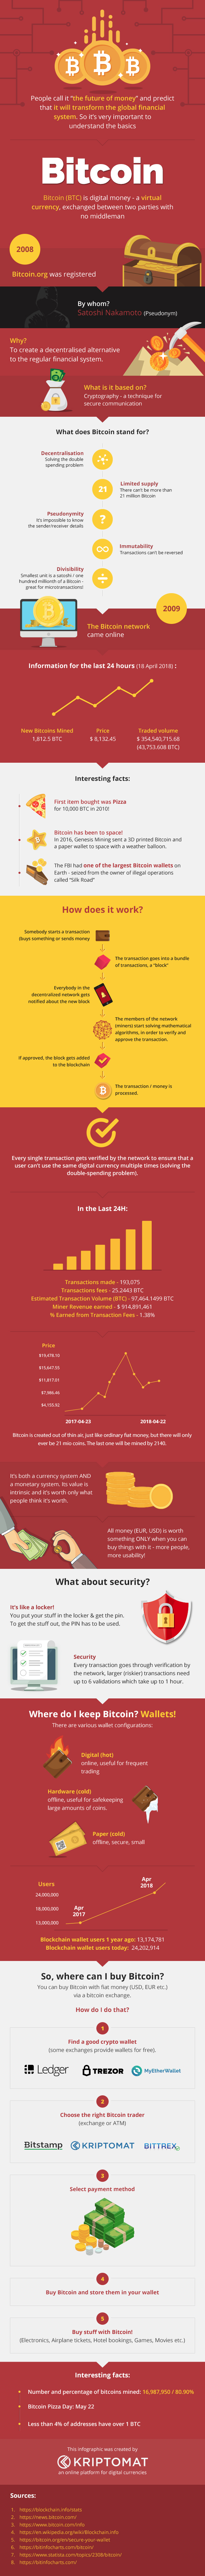 What Is Bitcoin and Where Can You Buy It? - #infographic